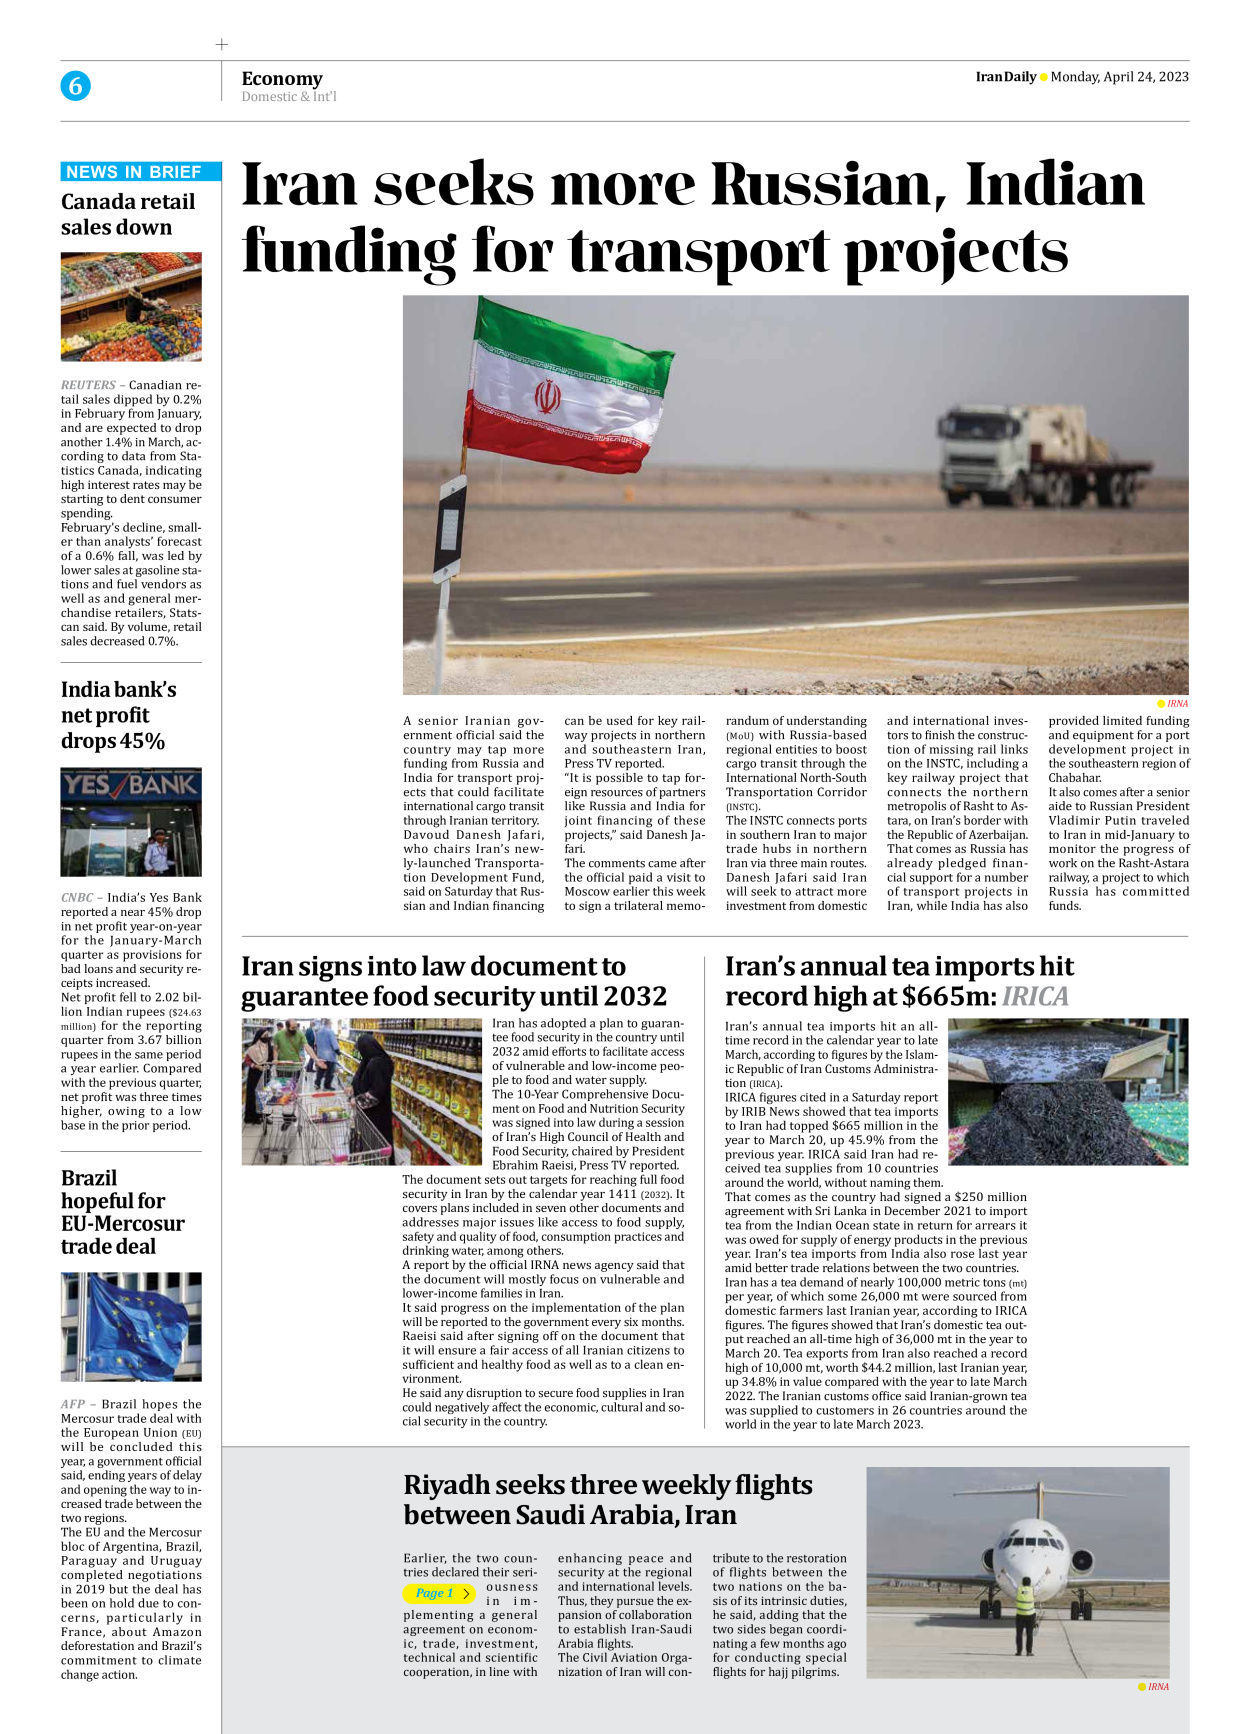 Iran Daily - Number Seven Thousand Two Hundred and Seventy Four - 24 April 2023 - Page 6